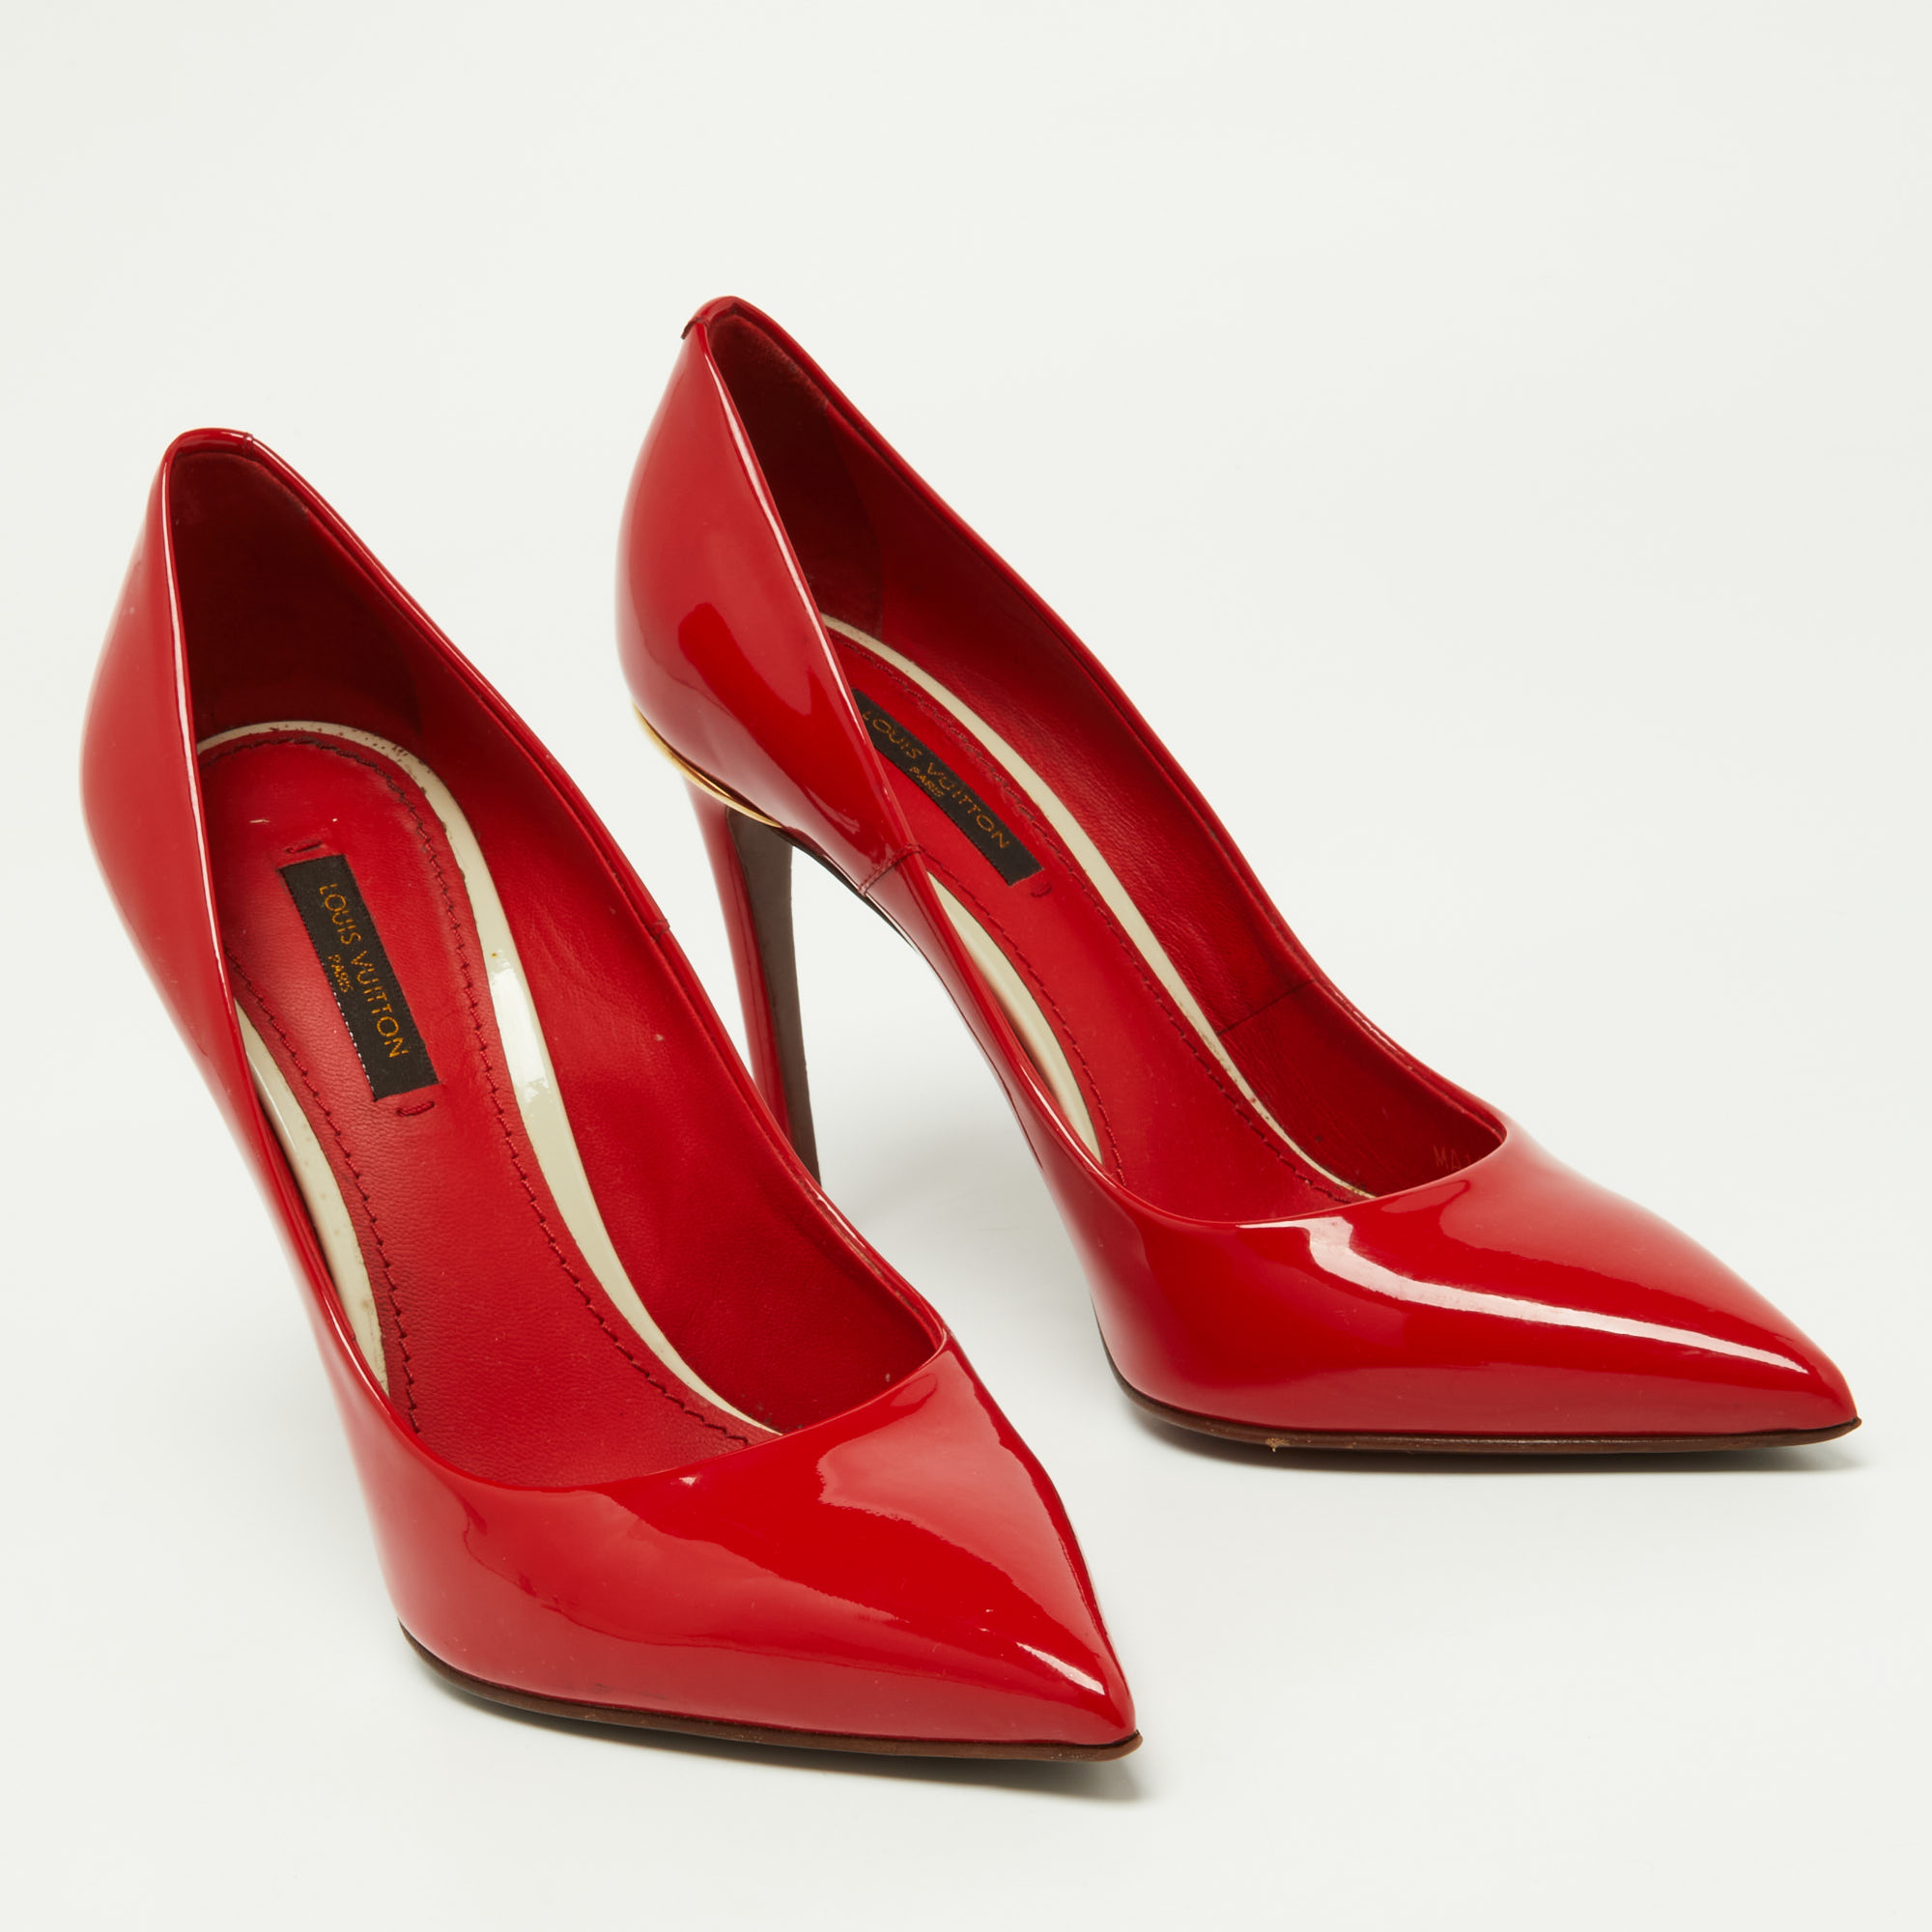 Louis Vuitton Red Patent Leather Eyeline Pointed Toe Pumps Size 37